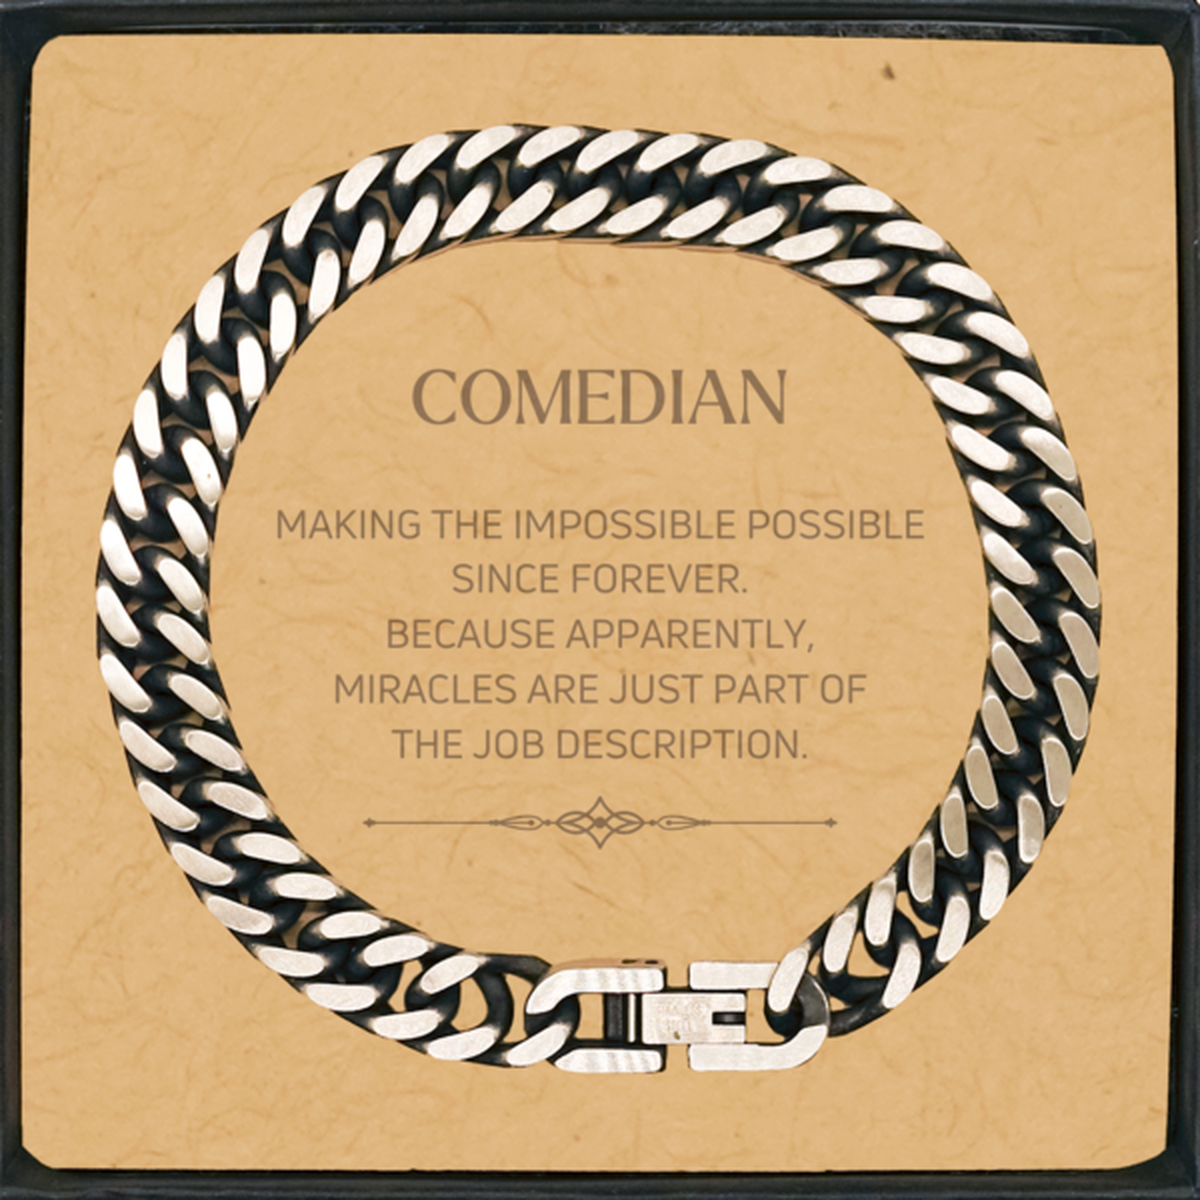 Funny Comedian Gifts, Miracles are just part of the job description, Inspirational Birthday Cuban Link Chain Bracelet For Comedian, Men, Women, Coworkers, Friends, Boss